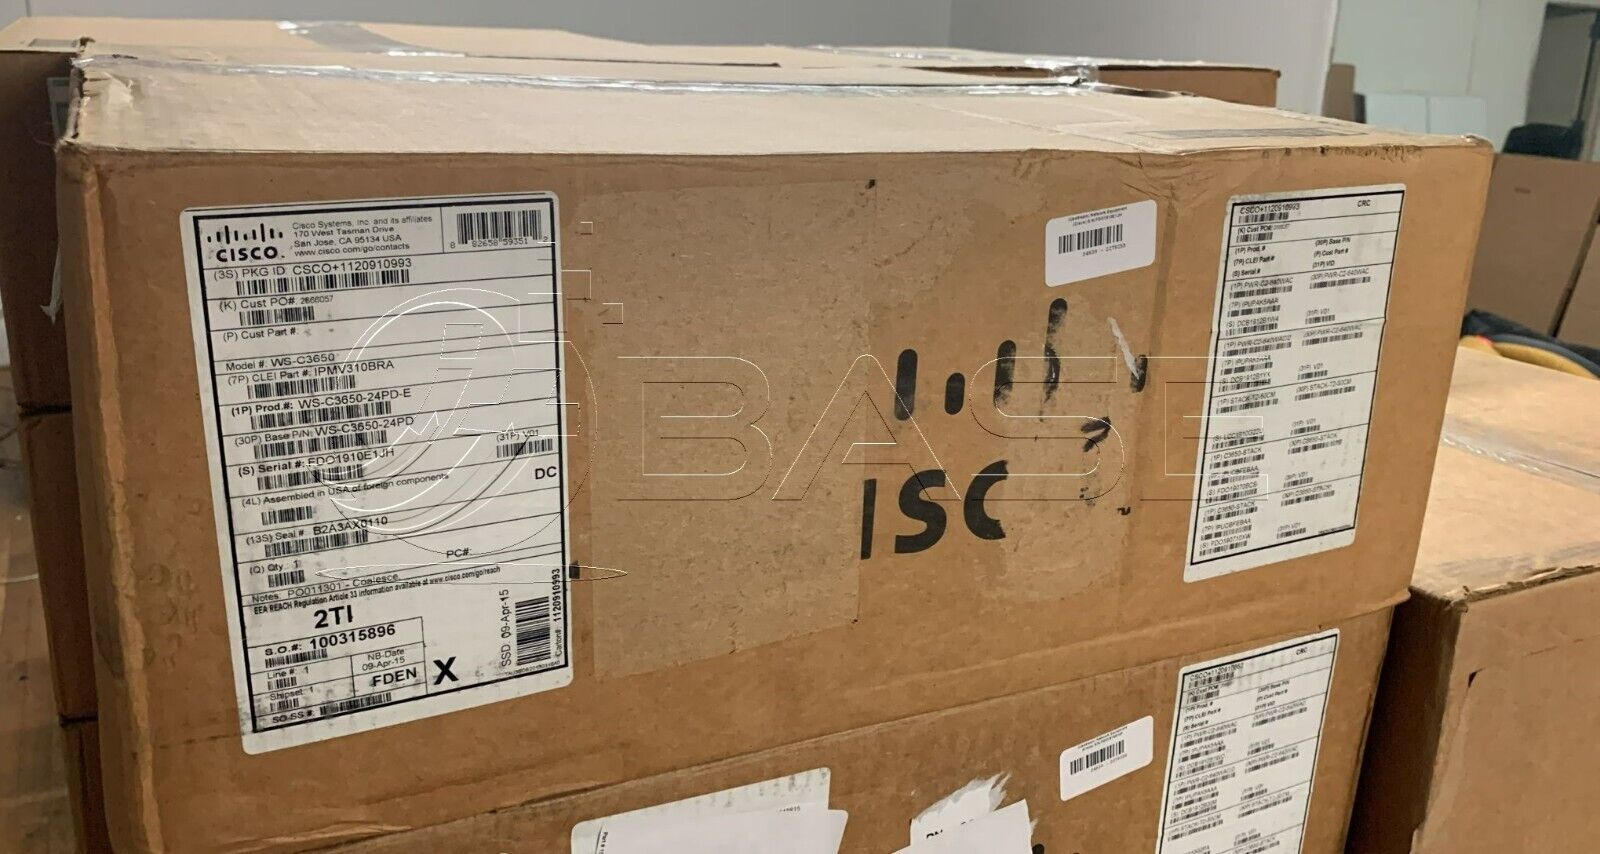 New Cisco WS-C3650-24PD-E Switch Dual Power, C3650-STACK-KIT & STACK-T2-50CM